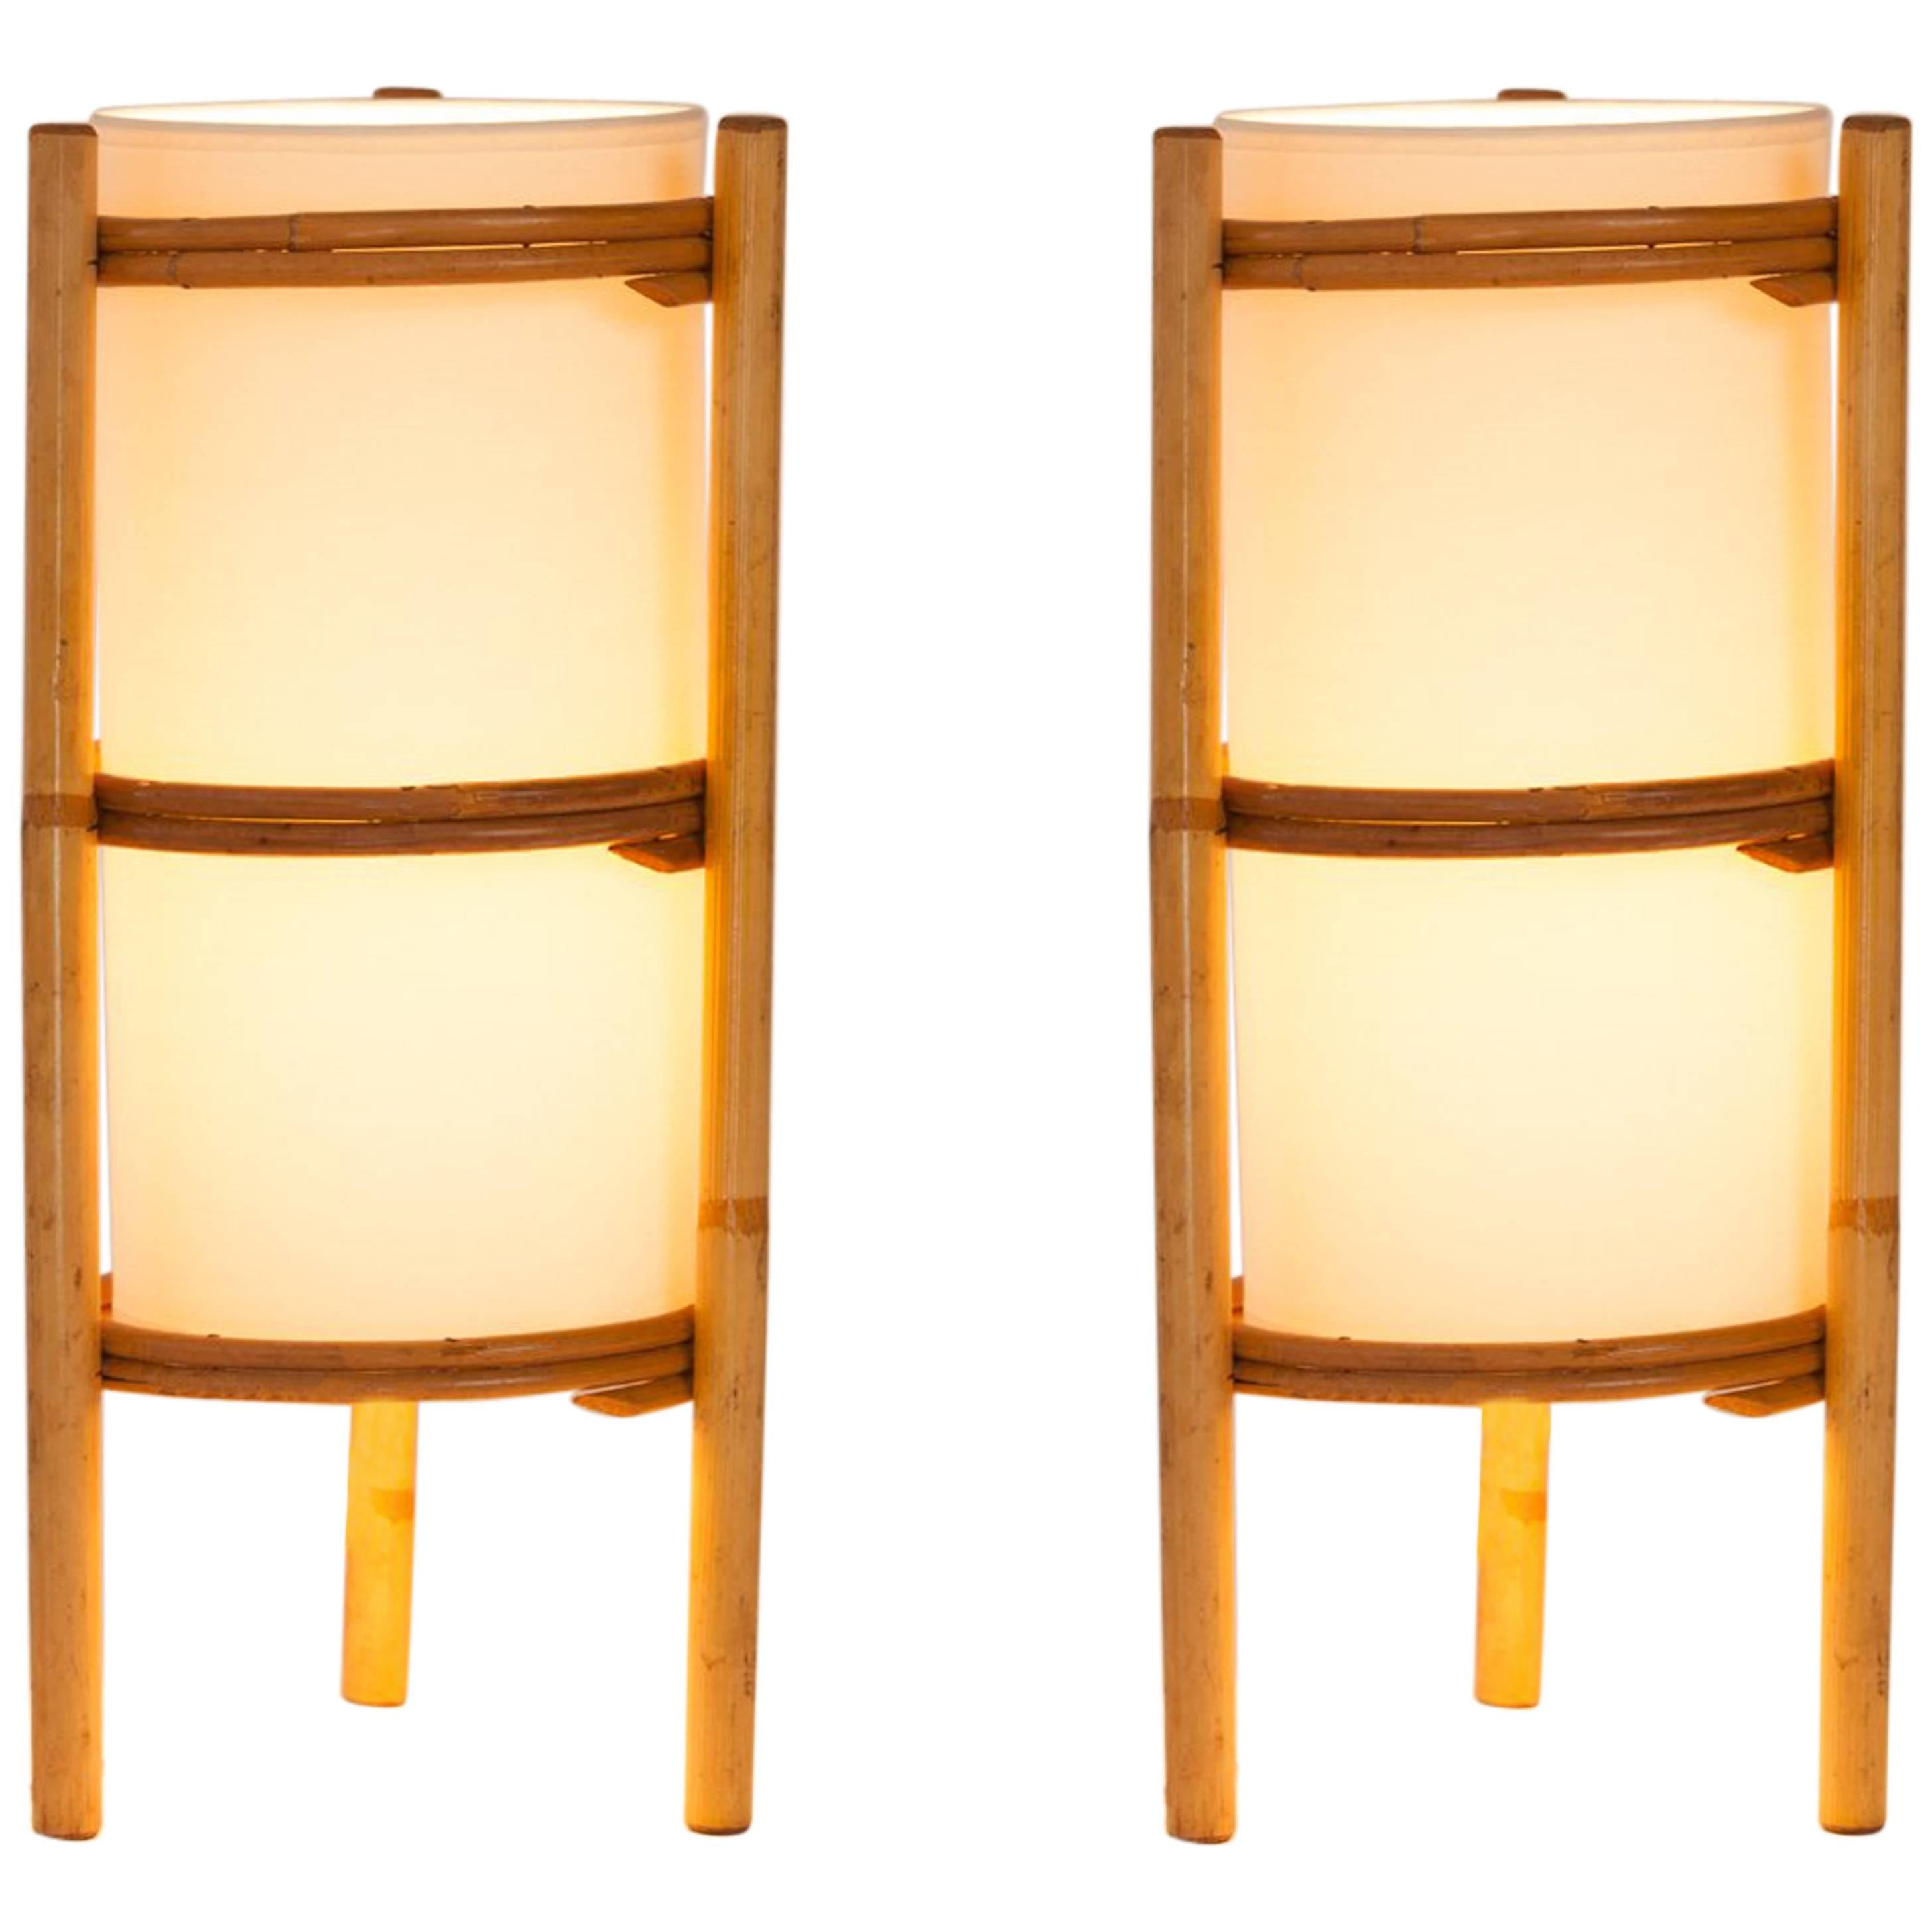 Pair of French Bamboo Lantern Style Table Lamps with Parchment Shades